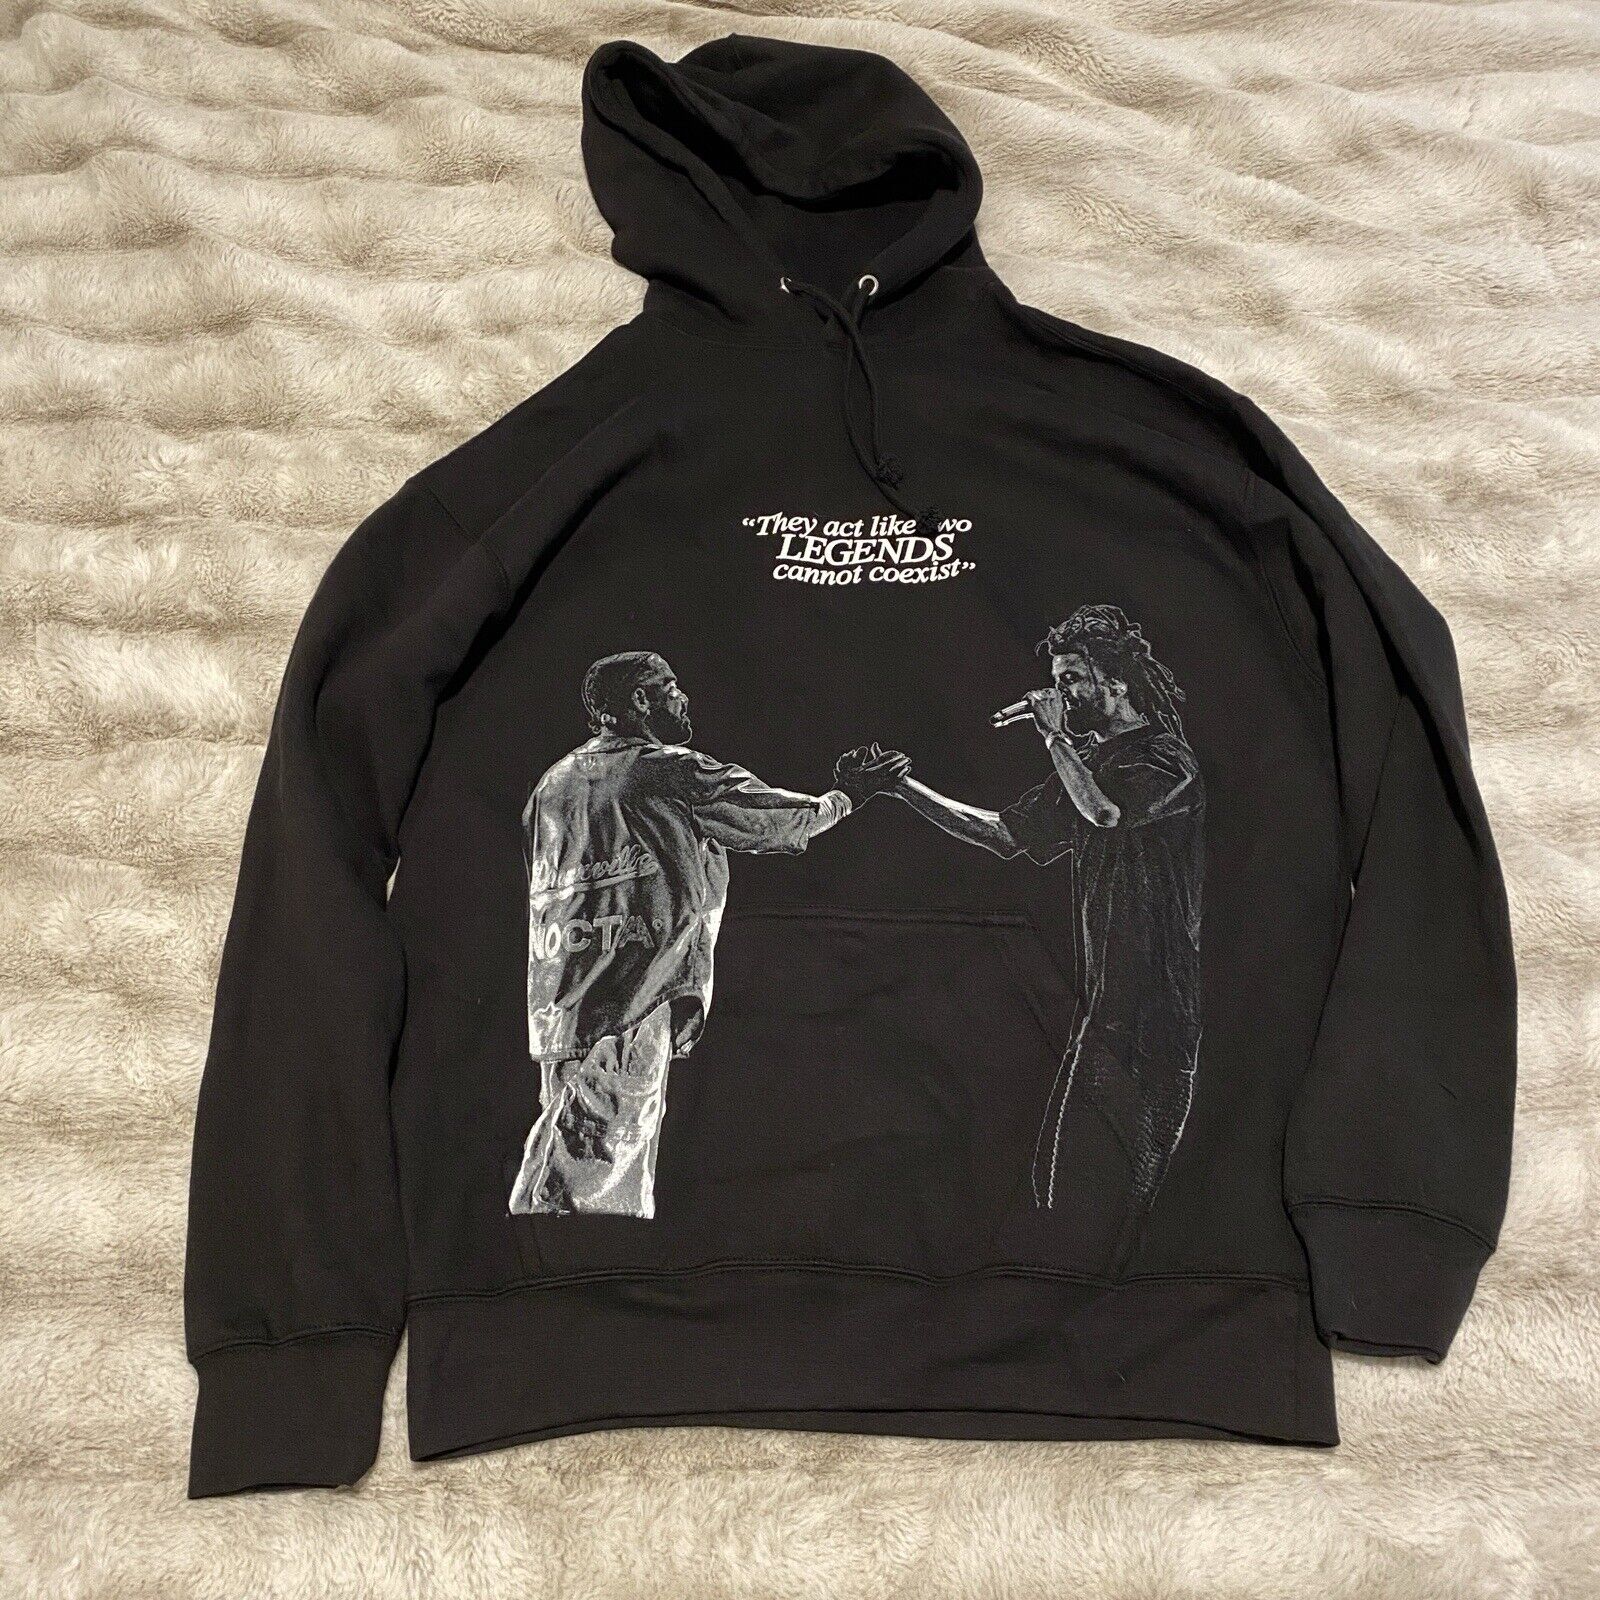 New! DRAKE x J. COLE “They Act Like Two Legends Cannot Coexist” Hoodie Size L